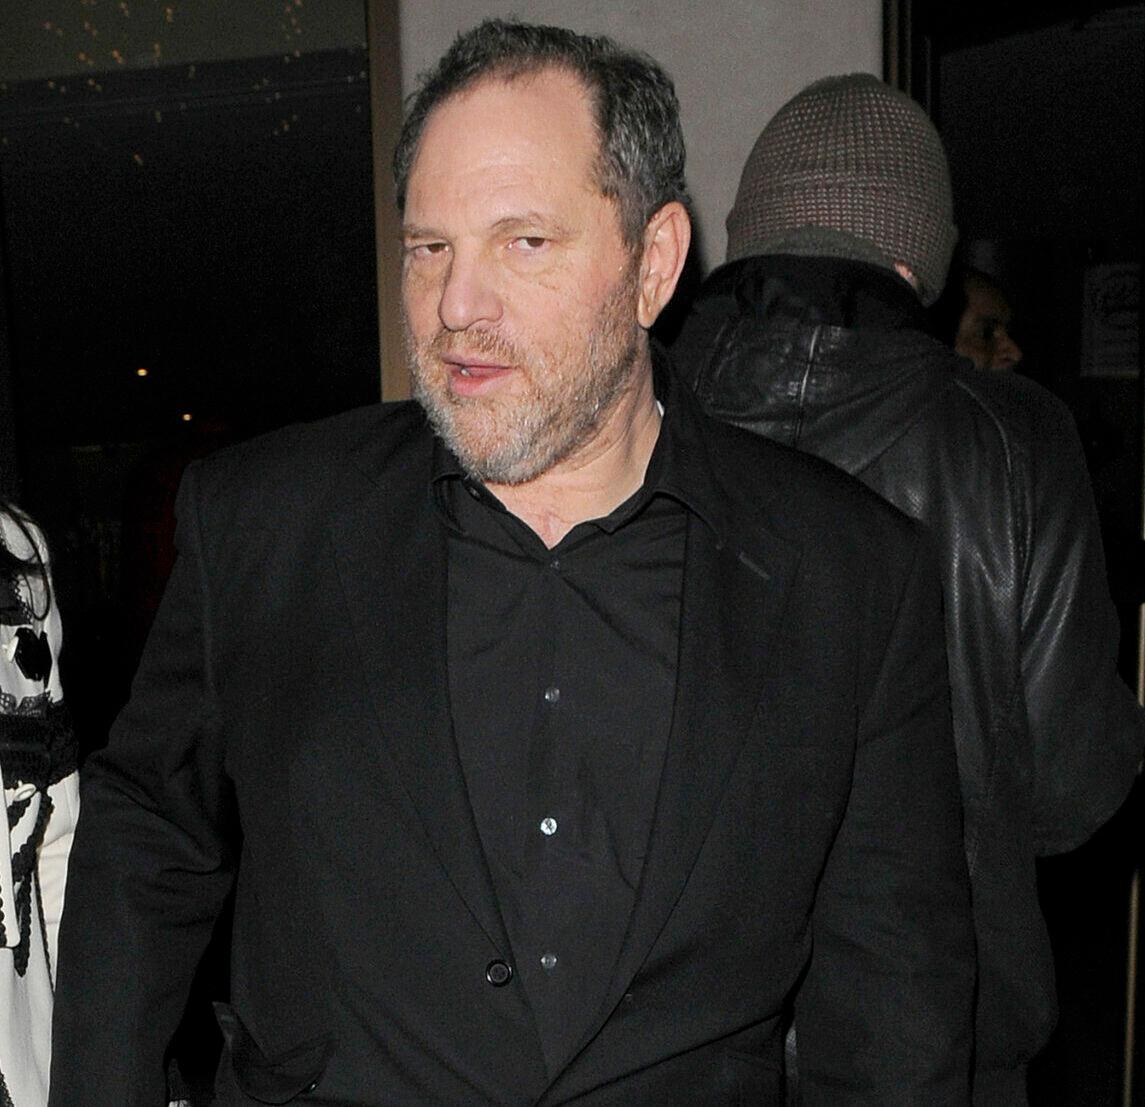 Celebrities including Sir Elton John David Furnish and Harvey Weinstein are seen leaving the May Fair Hotel